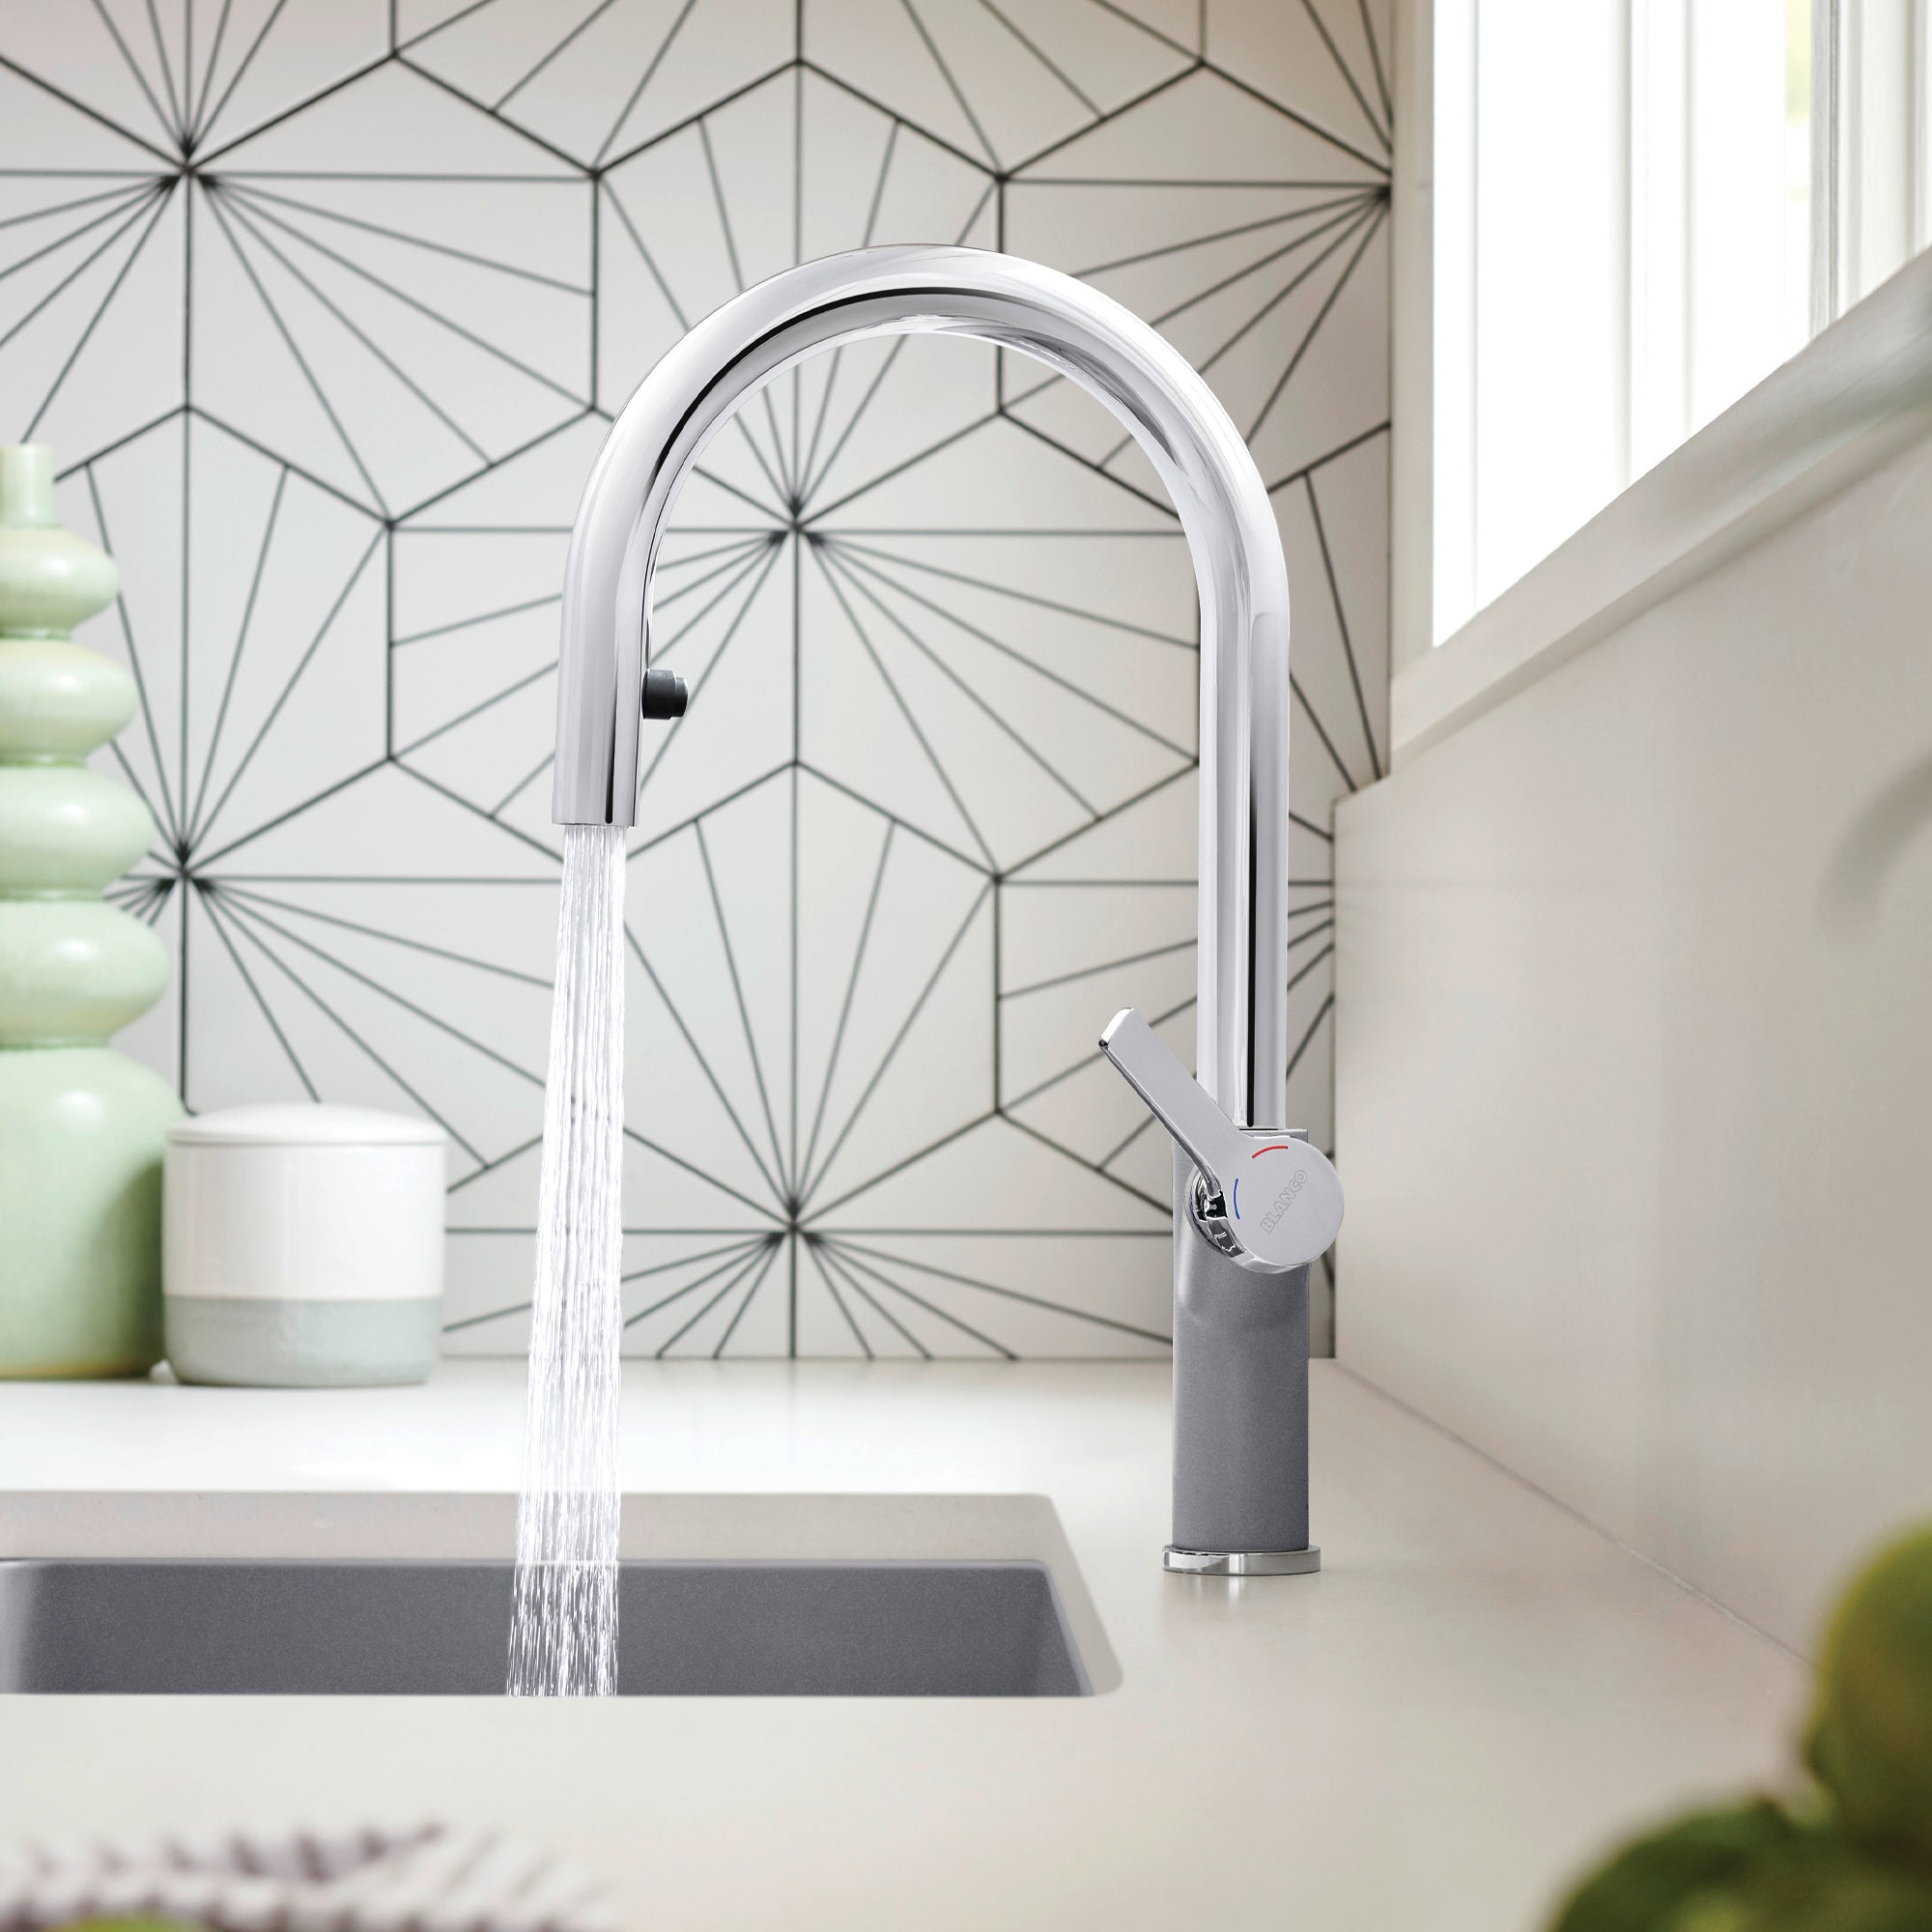 BLANCO Urbena Pull-Down Kitchen Faucet with SILGRANIT Finishes